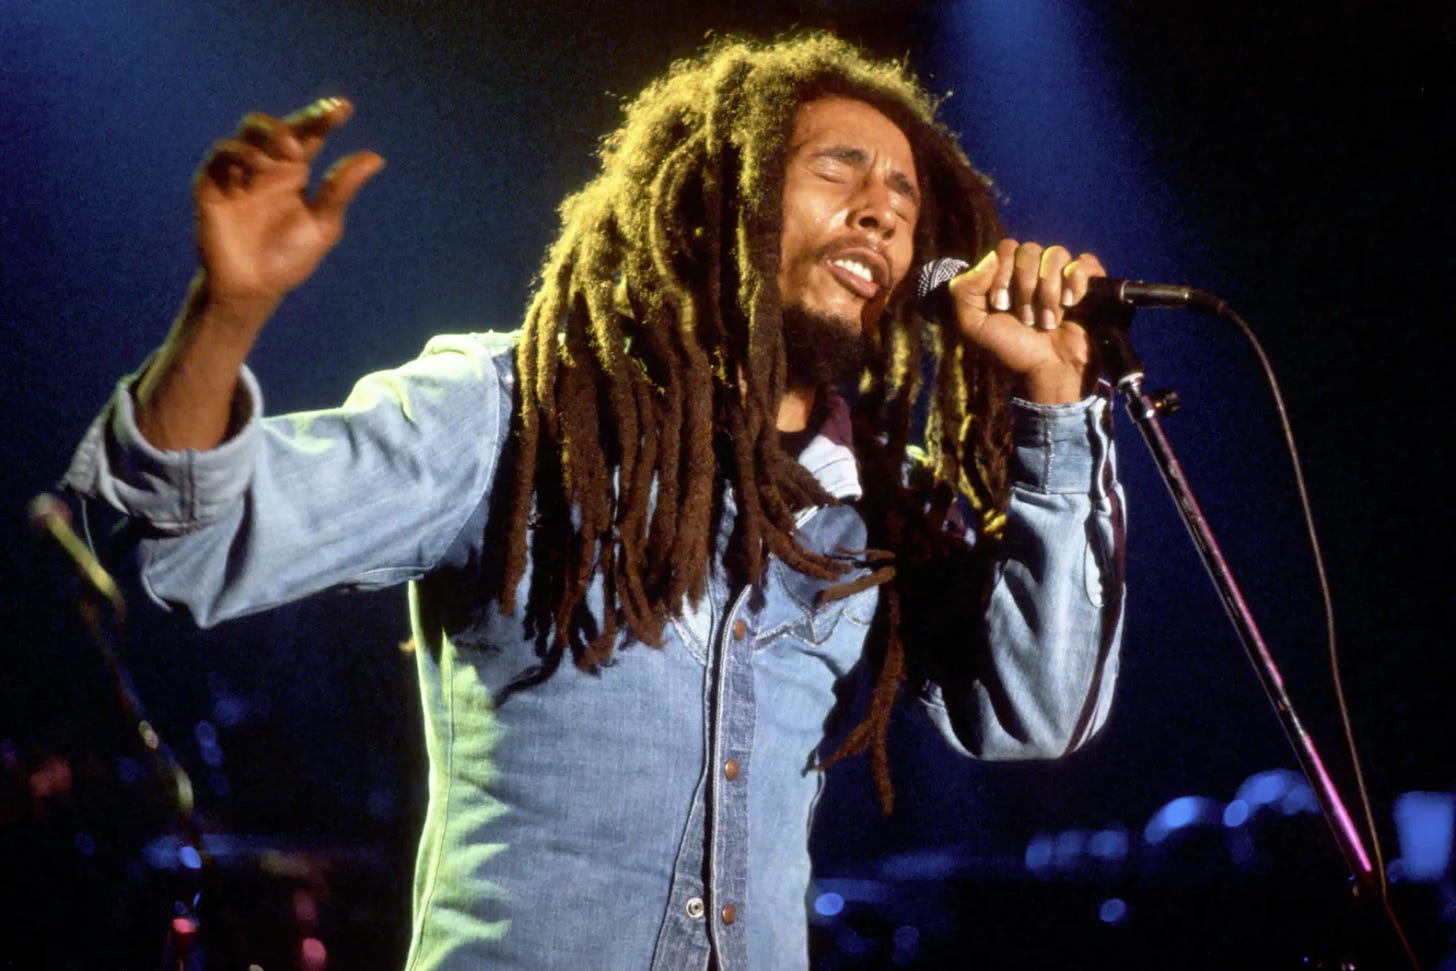 A picture of Bob Marley holding a mic with his left hand and raising his right hand up while passionately singing to an audience not visible in the image